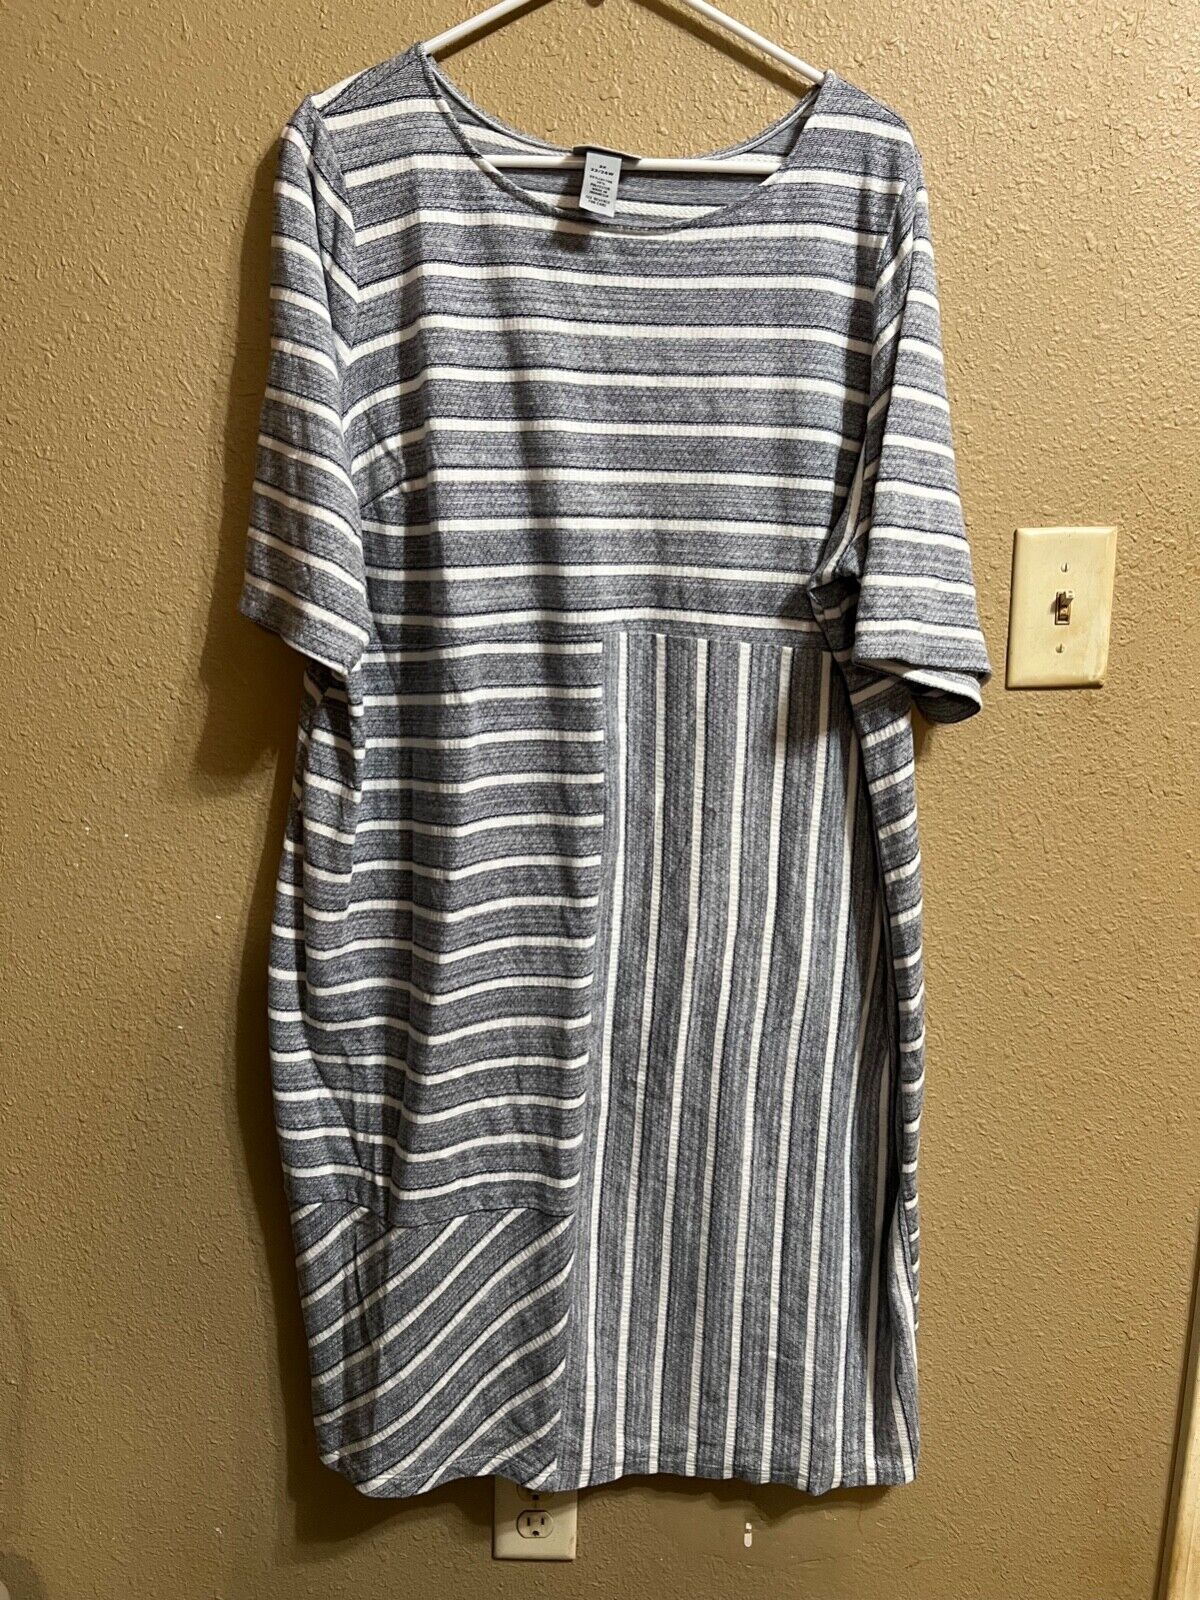 CATHERINES A-LINE DRESS SZ 2X (22/24W) GRAY AND WHITE STRETCH SHORT SLEEVES